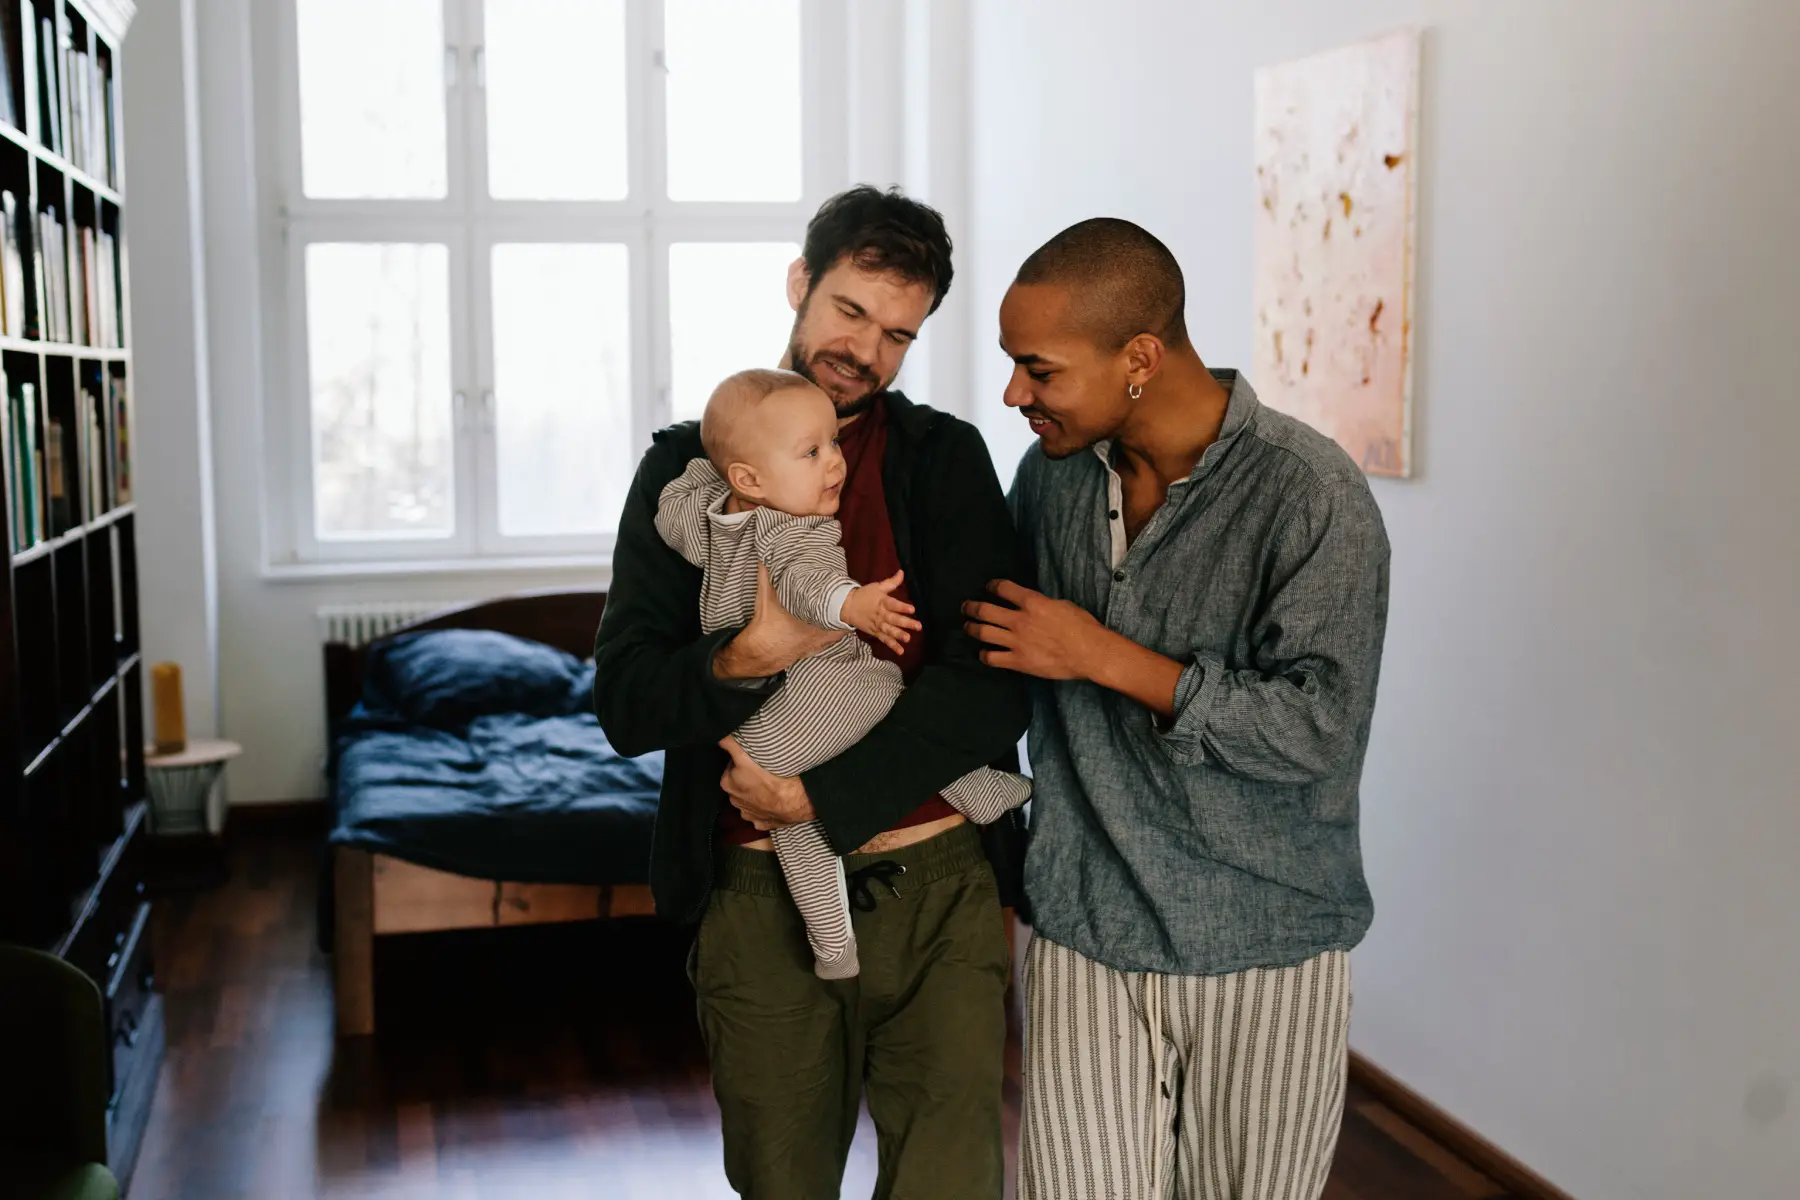 two men wearing pajamas and holding a young baby in their bedroom